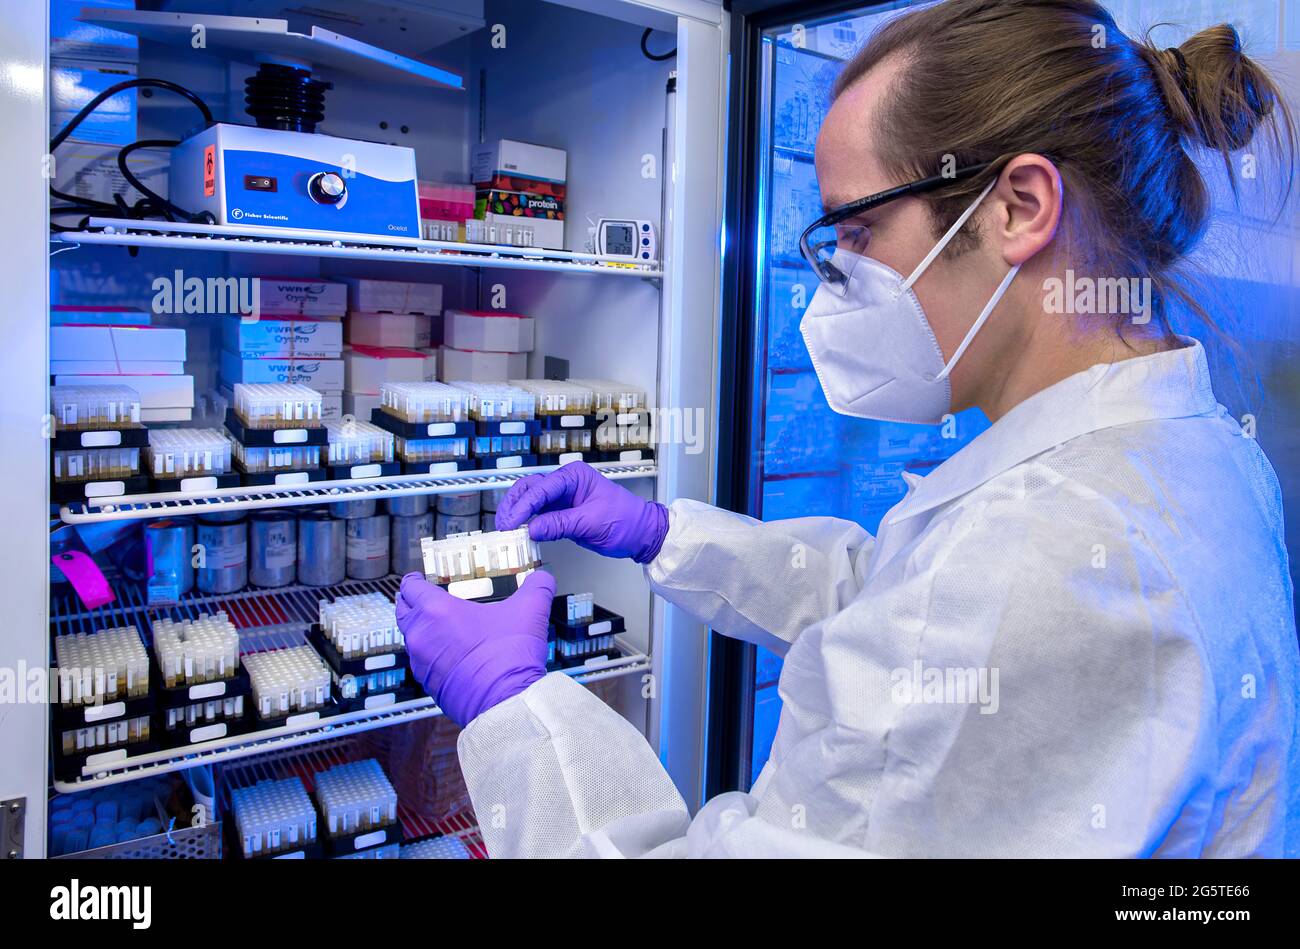 Centers for Disease Control and Prevention (CDC) scientists tested serological specimens for antibody,2 antibodies, using automated instrumentation. Serological testing is used to detect antibodies, which indicate past viral infection, and is important to the understand of disease prevalence within a population. Stock Photo